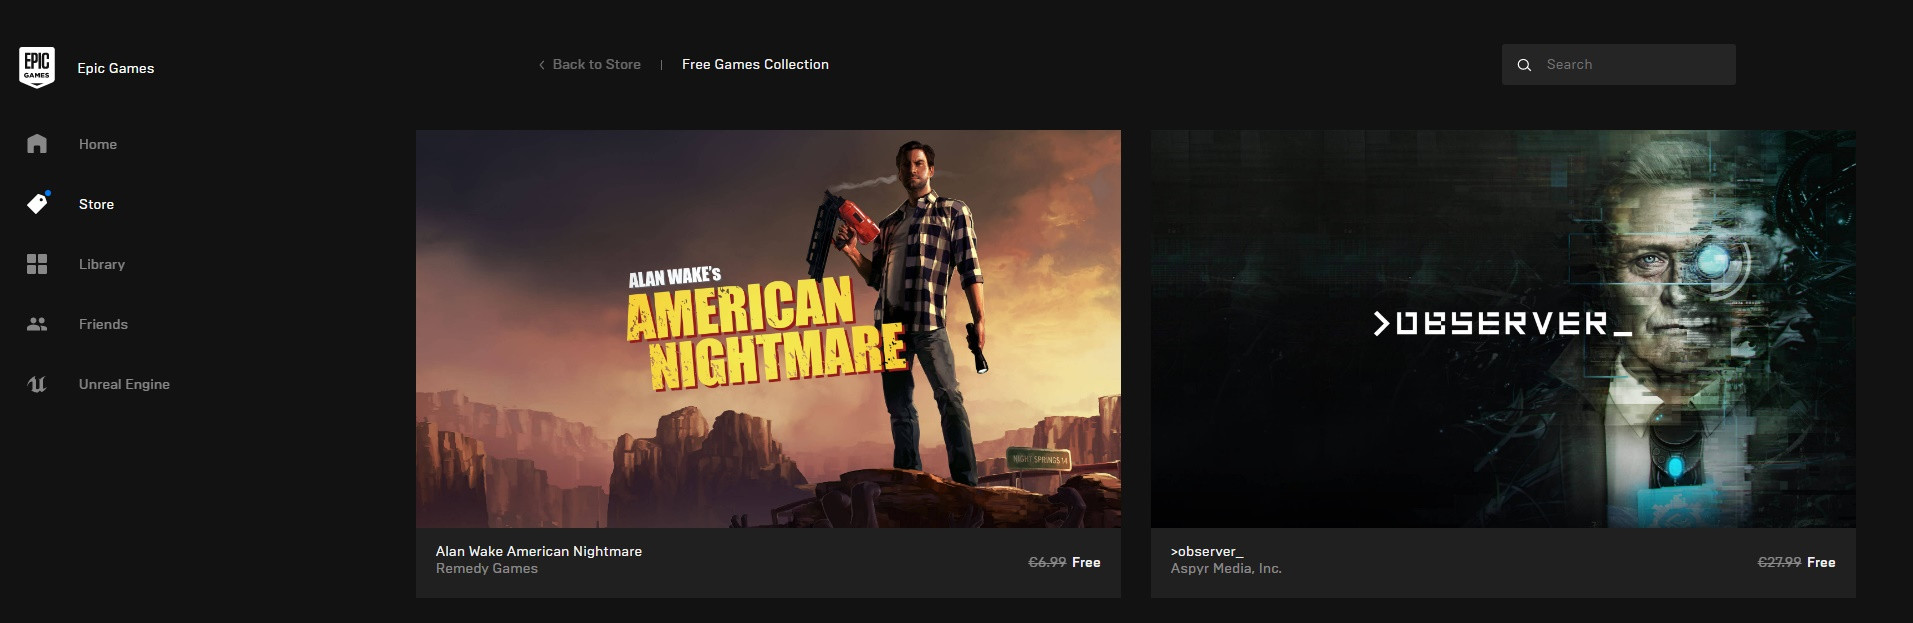 Free Game Alert Observer And Alan Wake S American Nightmare Free In The Epic Games Store Halloween Sale Launched Techpowerup